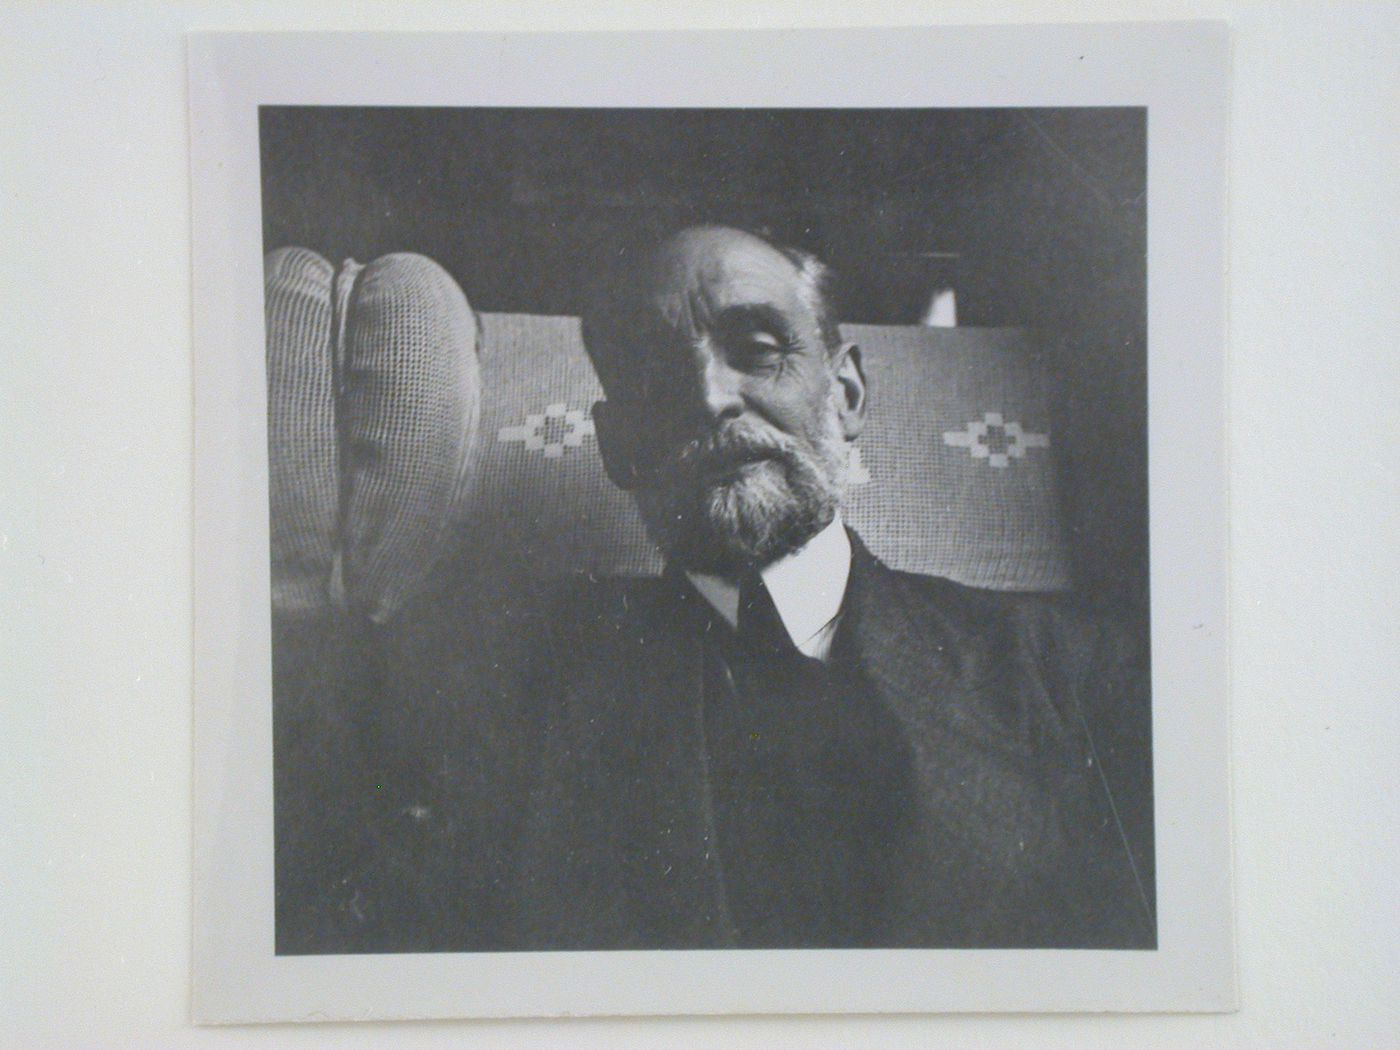 Portrait of Mr Sébille, a French architect, in a train car